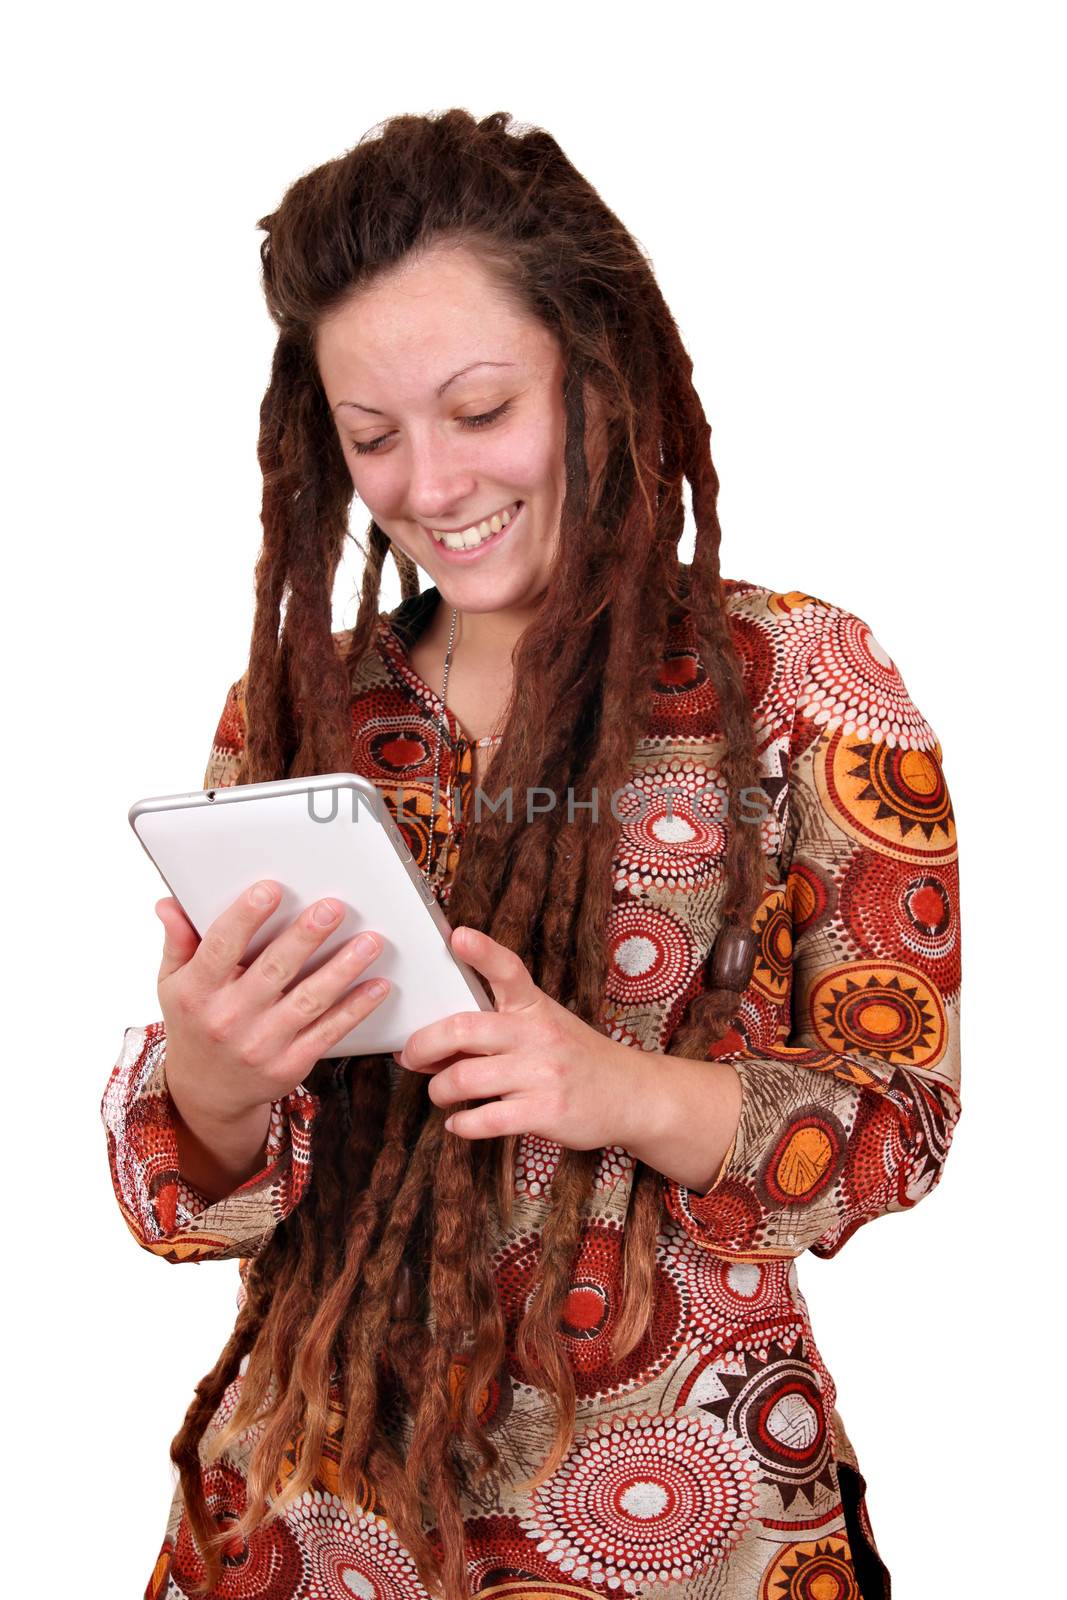 happy girl with dreadlocks hair play tablet pc by goce